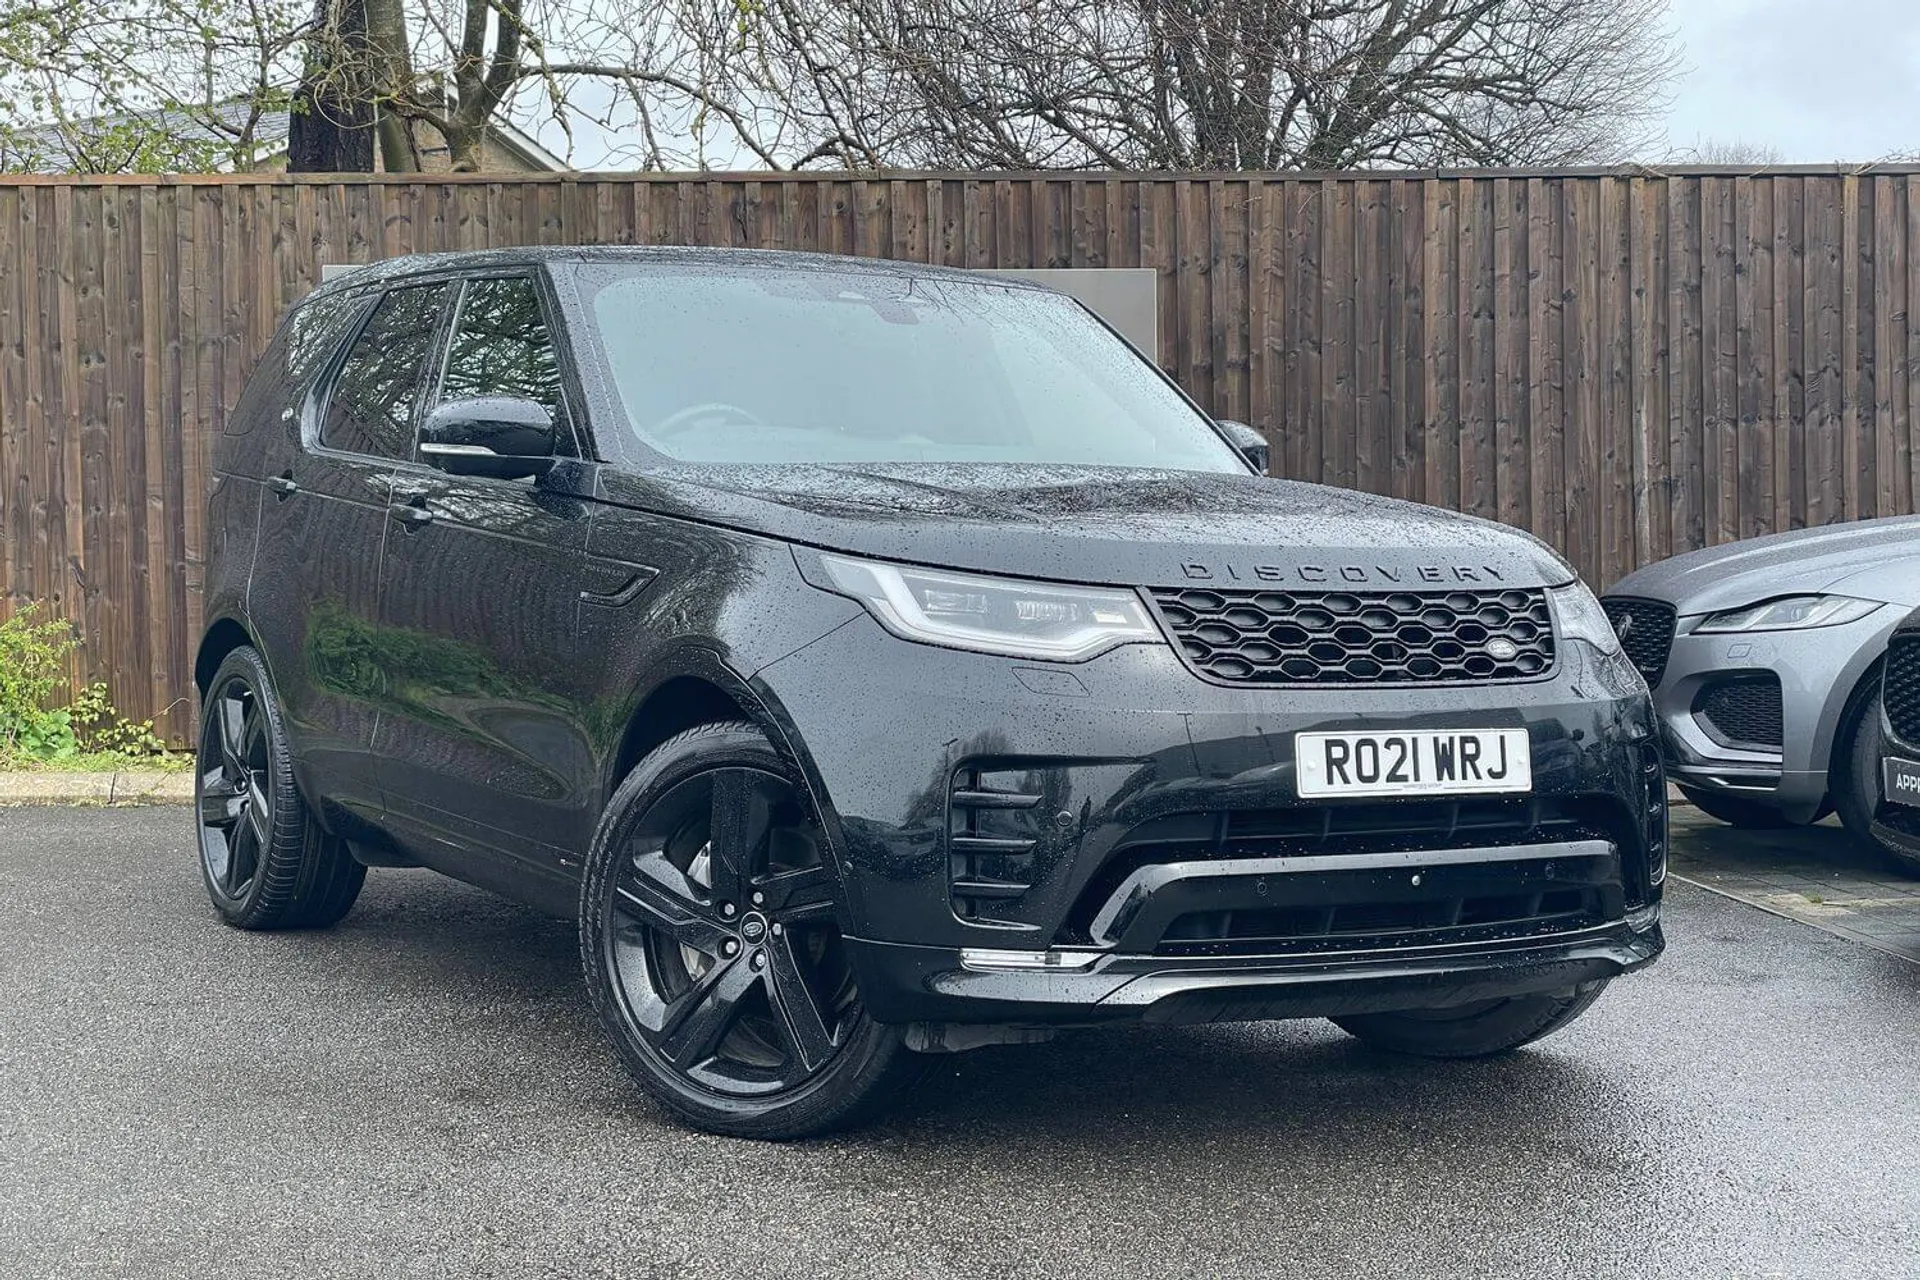 LAND ROVER DISCOVERY focused image